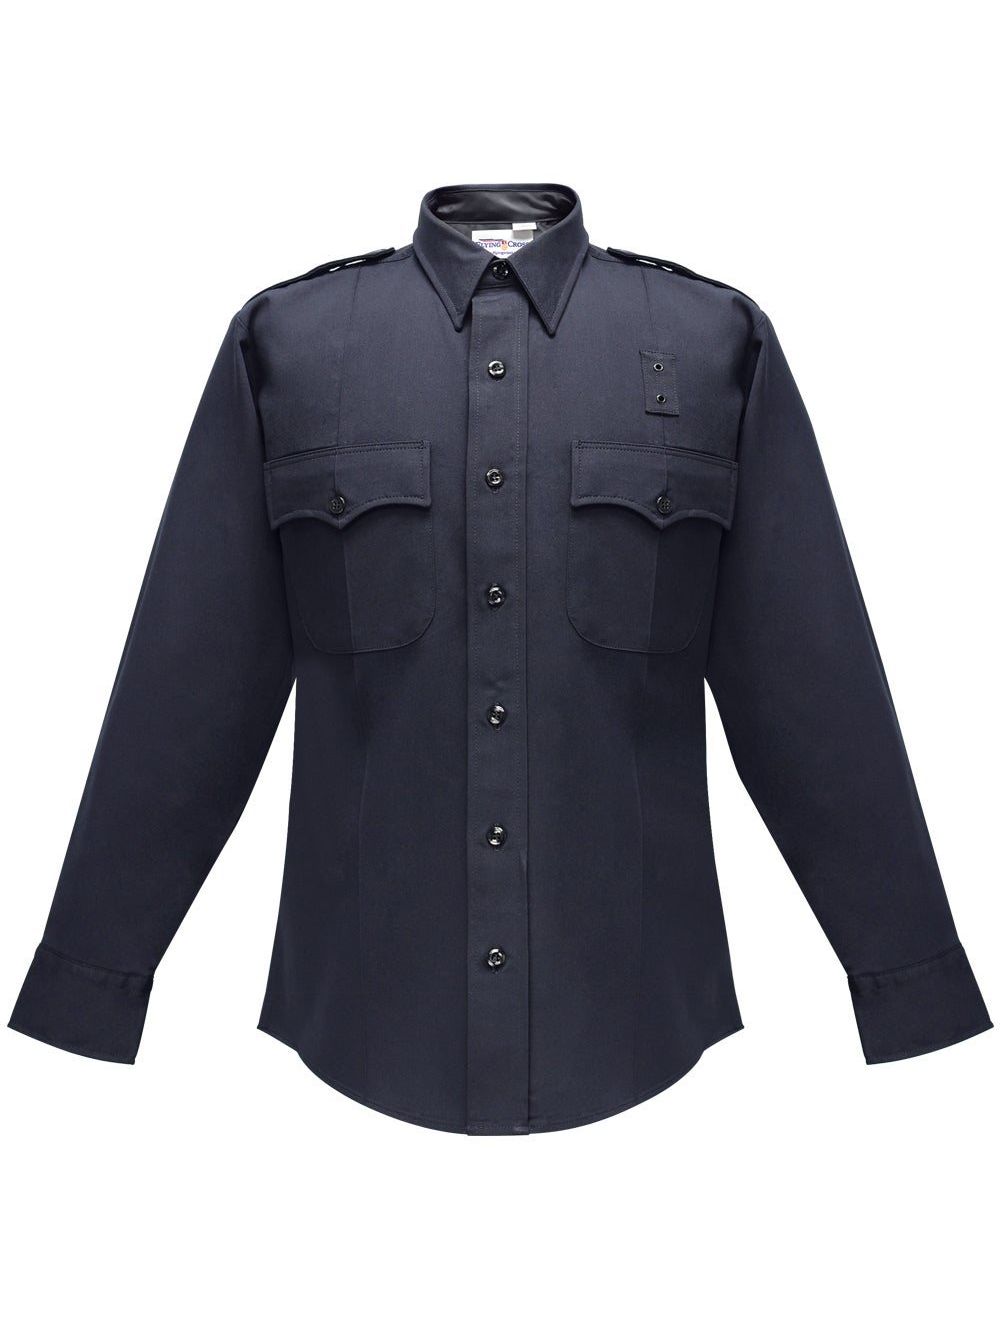 Deluxe Tactical Long Sleeve Shirt w/ Com Ports - LAPD Navy